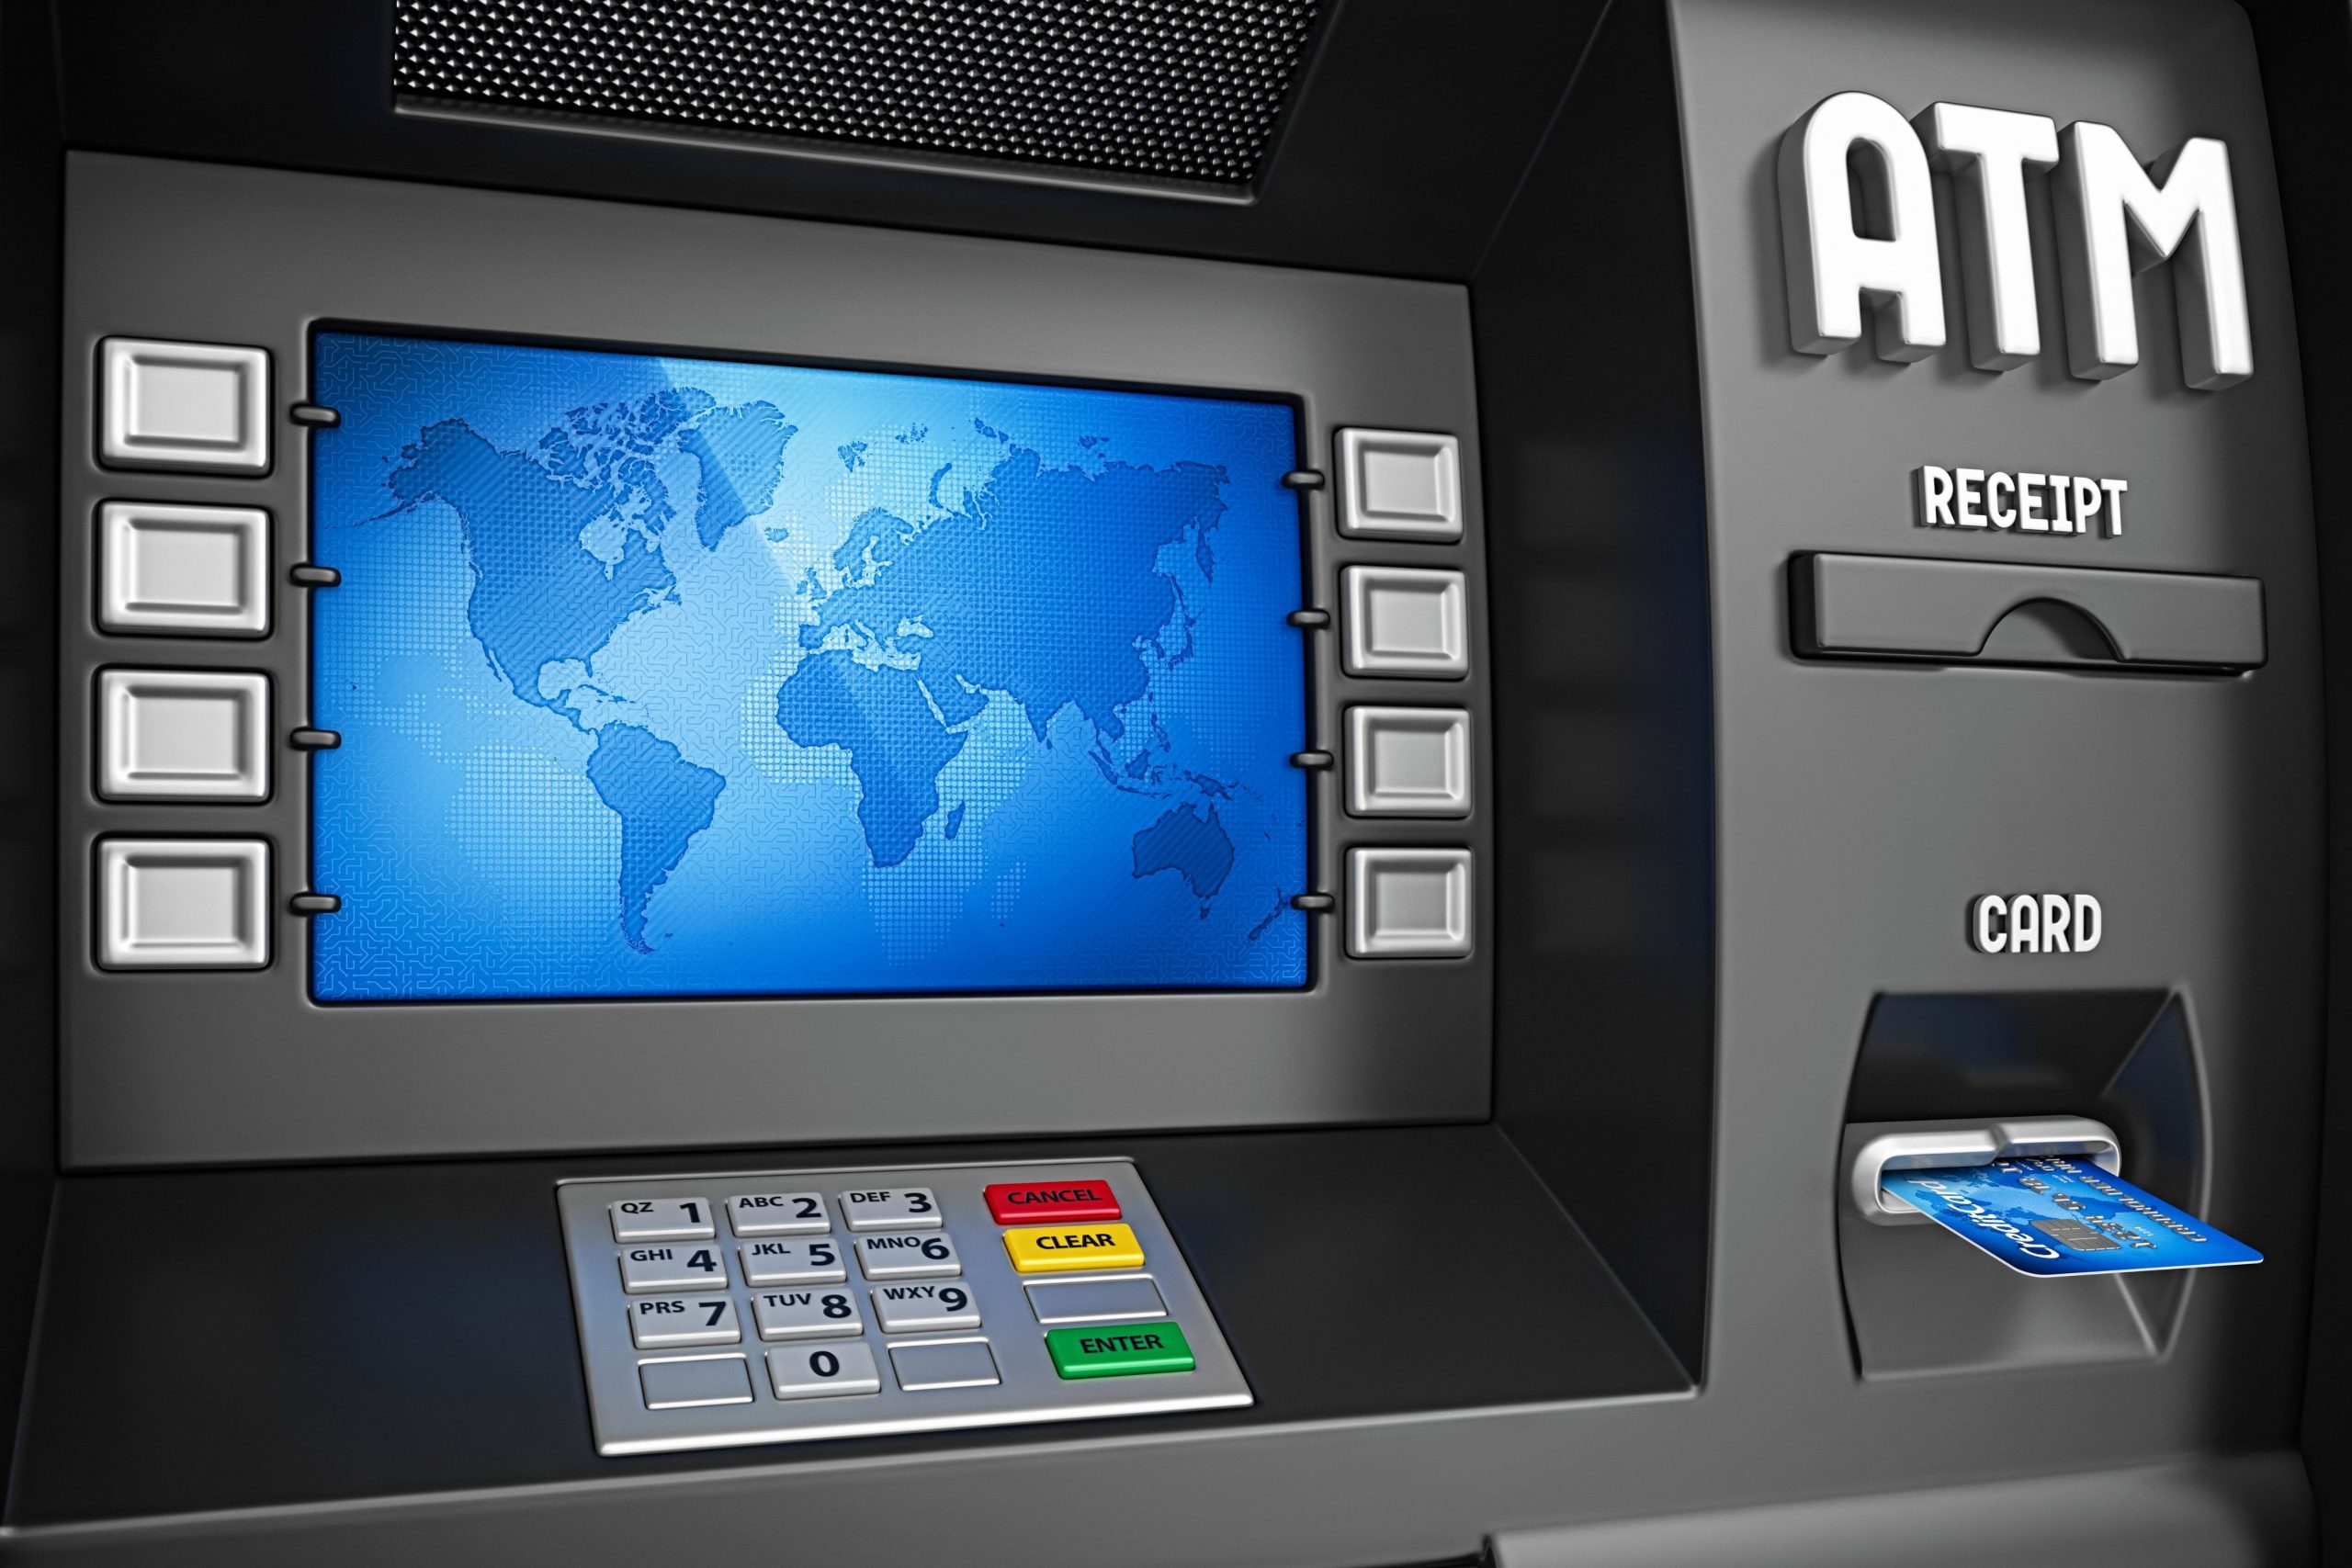 What Is an ATM and How Does It Work?